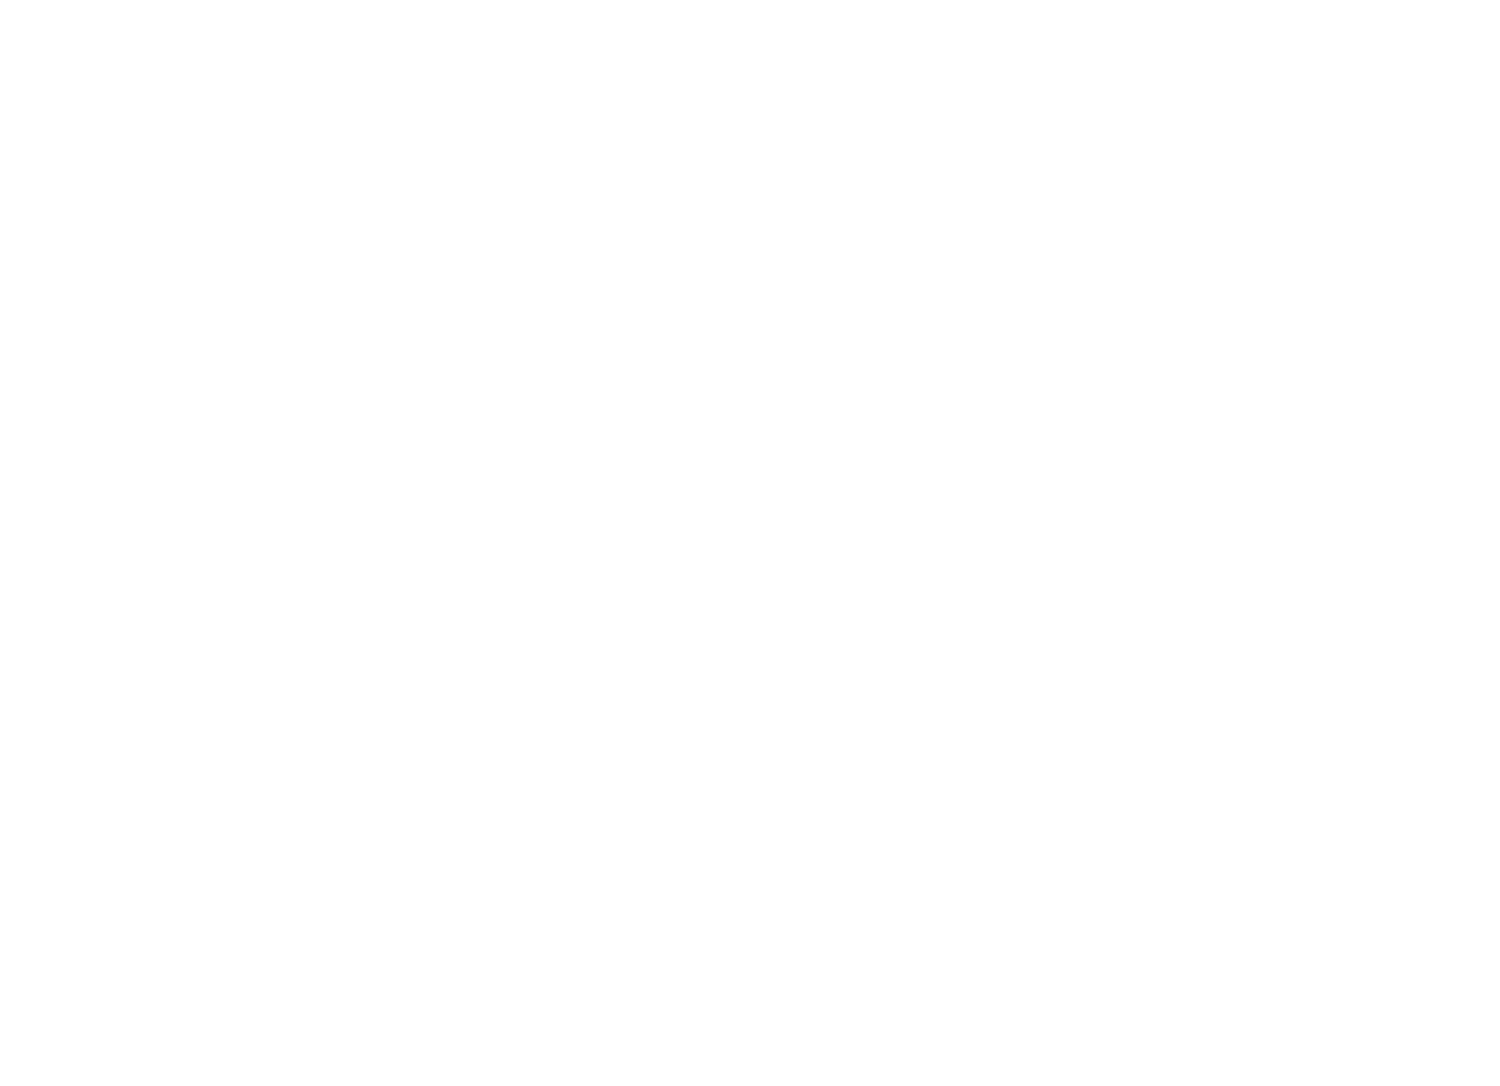 Story of You Media